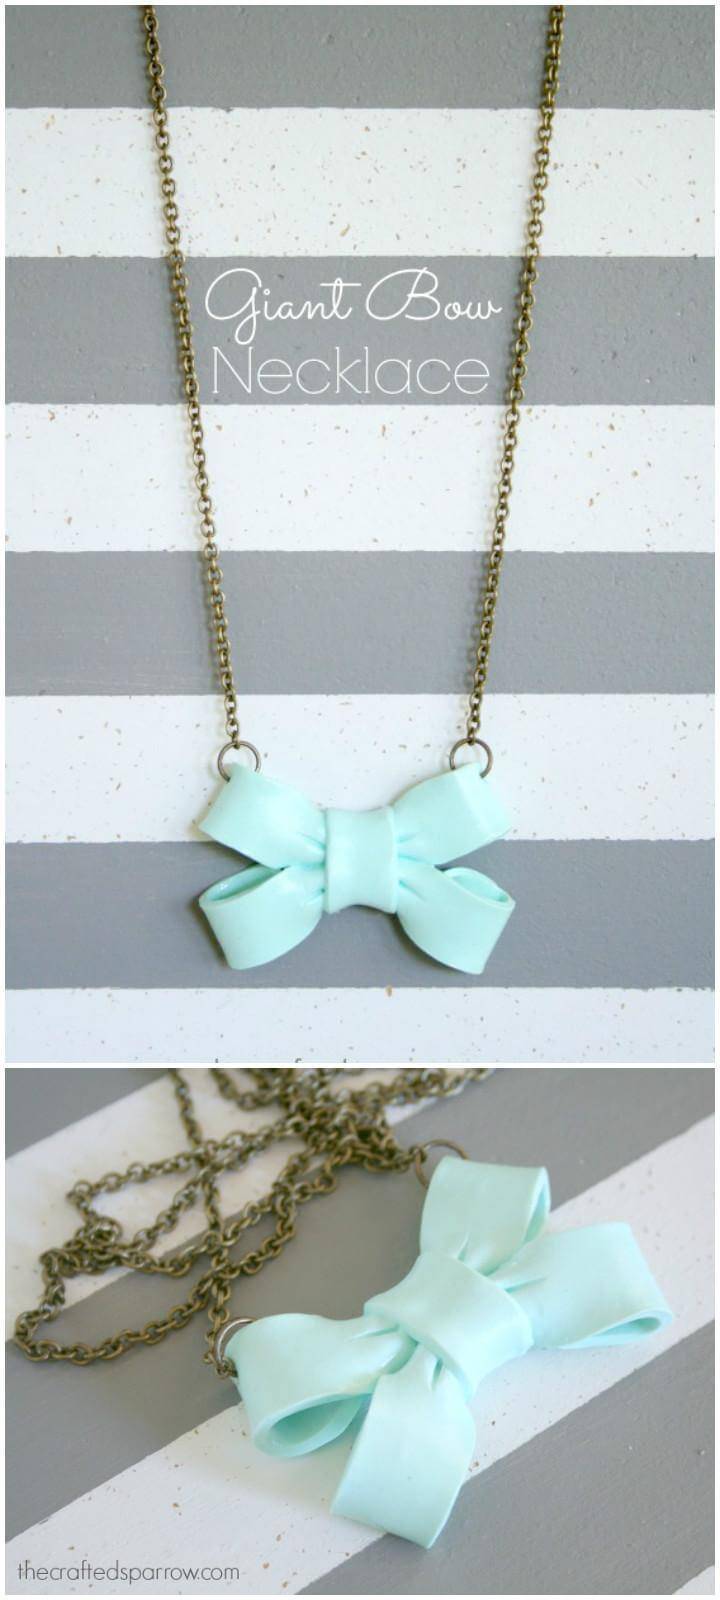 DIY Gorgeous Giant Bow Necklace